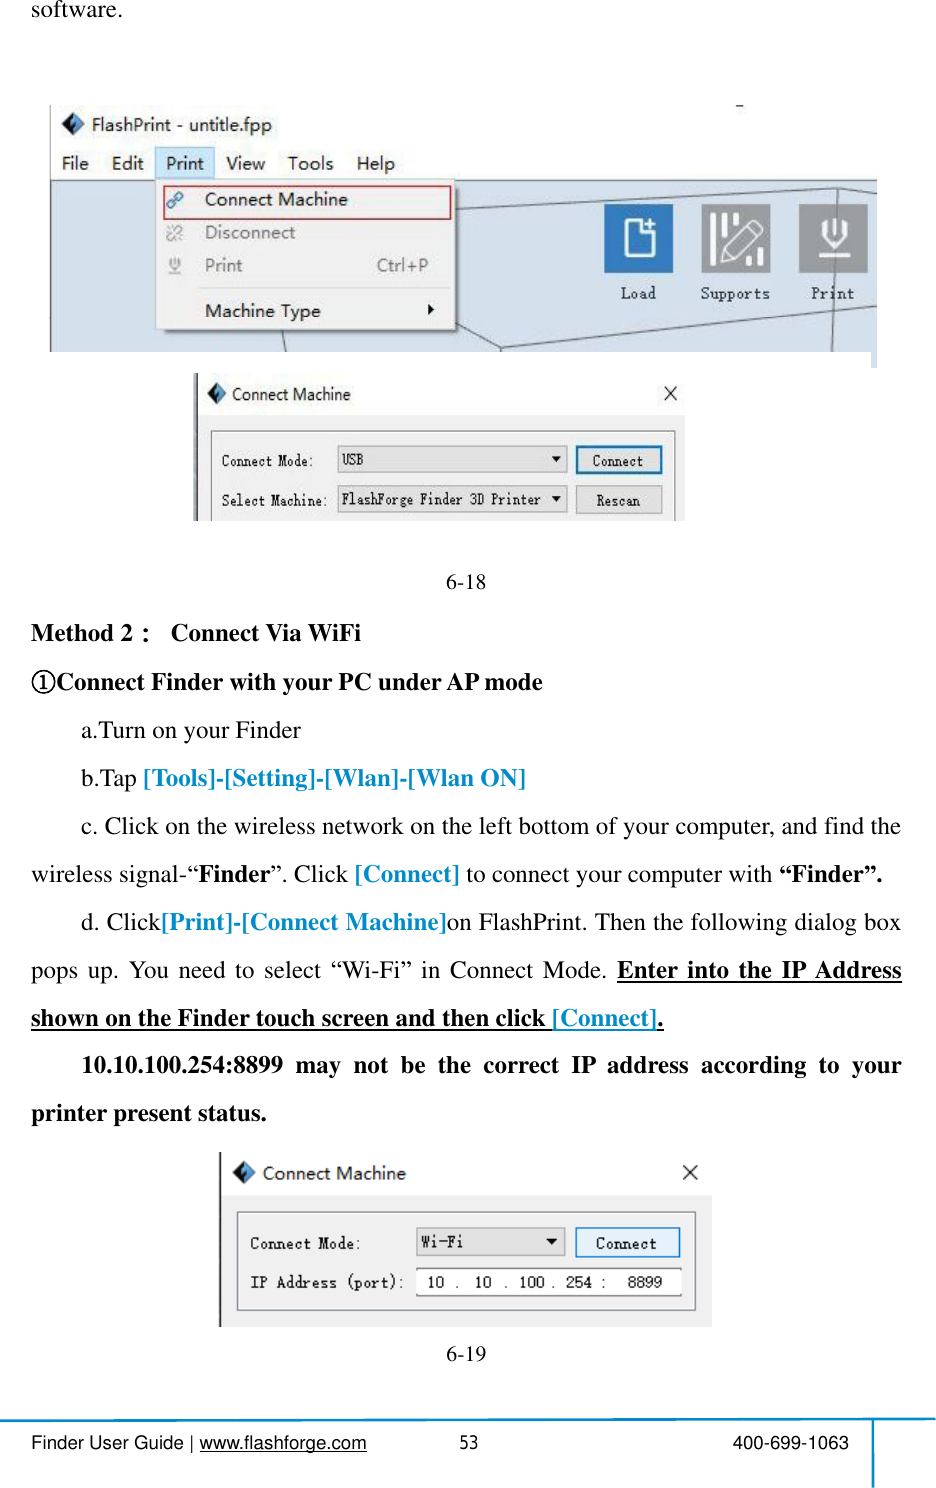  Finder User Guide|www.flashforge.com 400-699-106353software.6-18Method 2 ConnectVia WiFiConnectFinderwith your PCunderAPmodea.Turn on your Finderb.Tap [Tools]-[Setting]-[Wlan]-[WlanON]c.Clickonthewirelessnetworkontheleftbottomofyourcomputer,andfindthewireless signal- Finder .Click [Connect] to connect your computerwith Finder .d.Click[Print]-[ConnectMachine]onFlashPrint.Thenthefollowingdialogboxpopsup.Youneedtoselect Wi-Fi inConnectMode. EnterintotheIPAddressshown on the Findertouch screen and then click [Connect].10.10.100.254:8899maynotbethecorrectIPaddressaccordingtoyourprinter present status.6-19